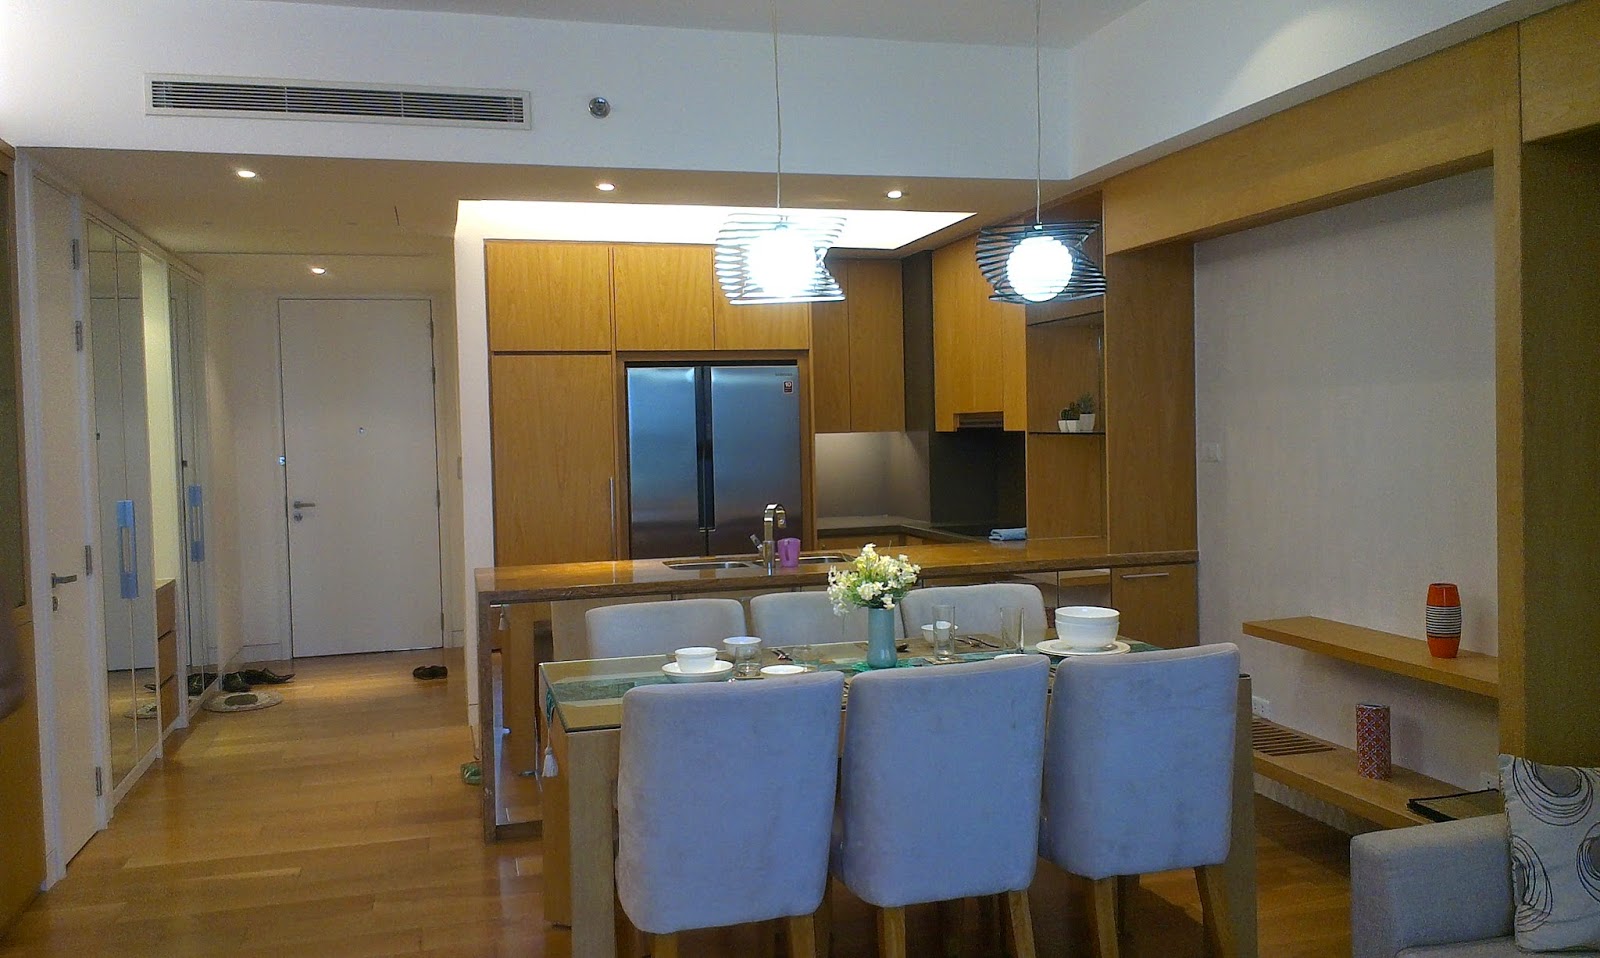 A luxury apartment in The Indochina Plaza for renting (1700$) IMAG0127